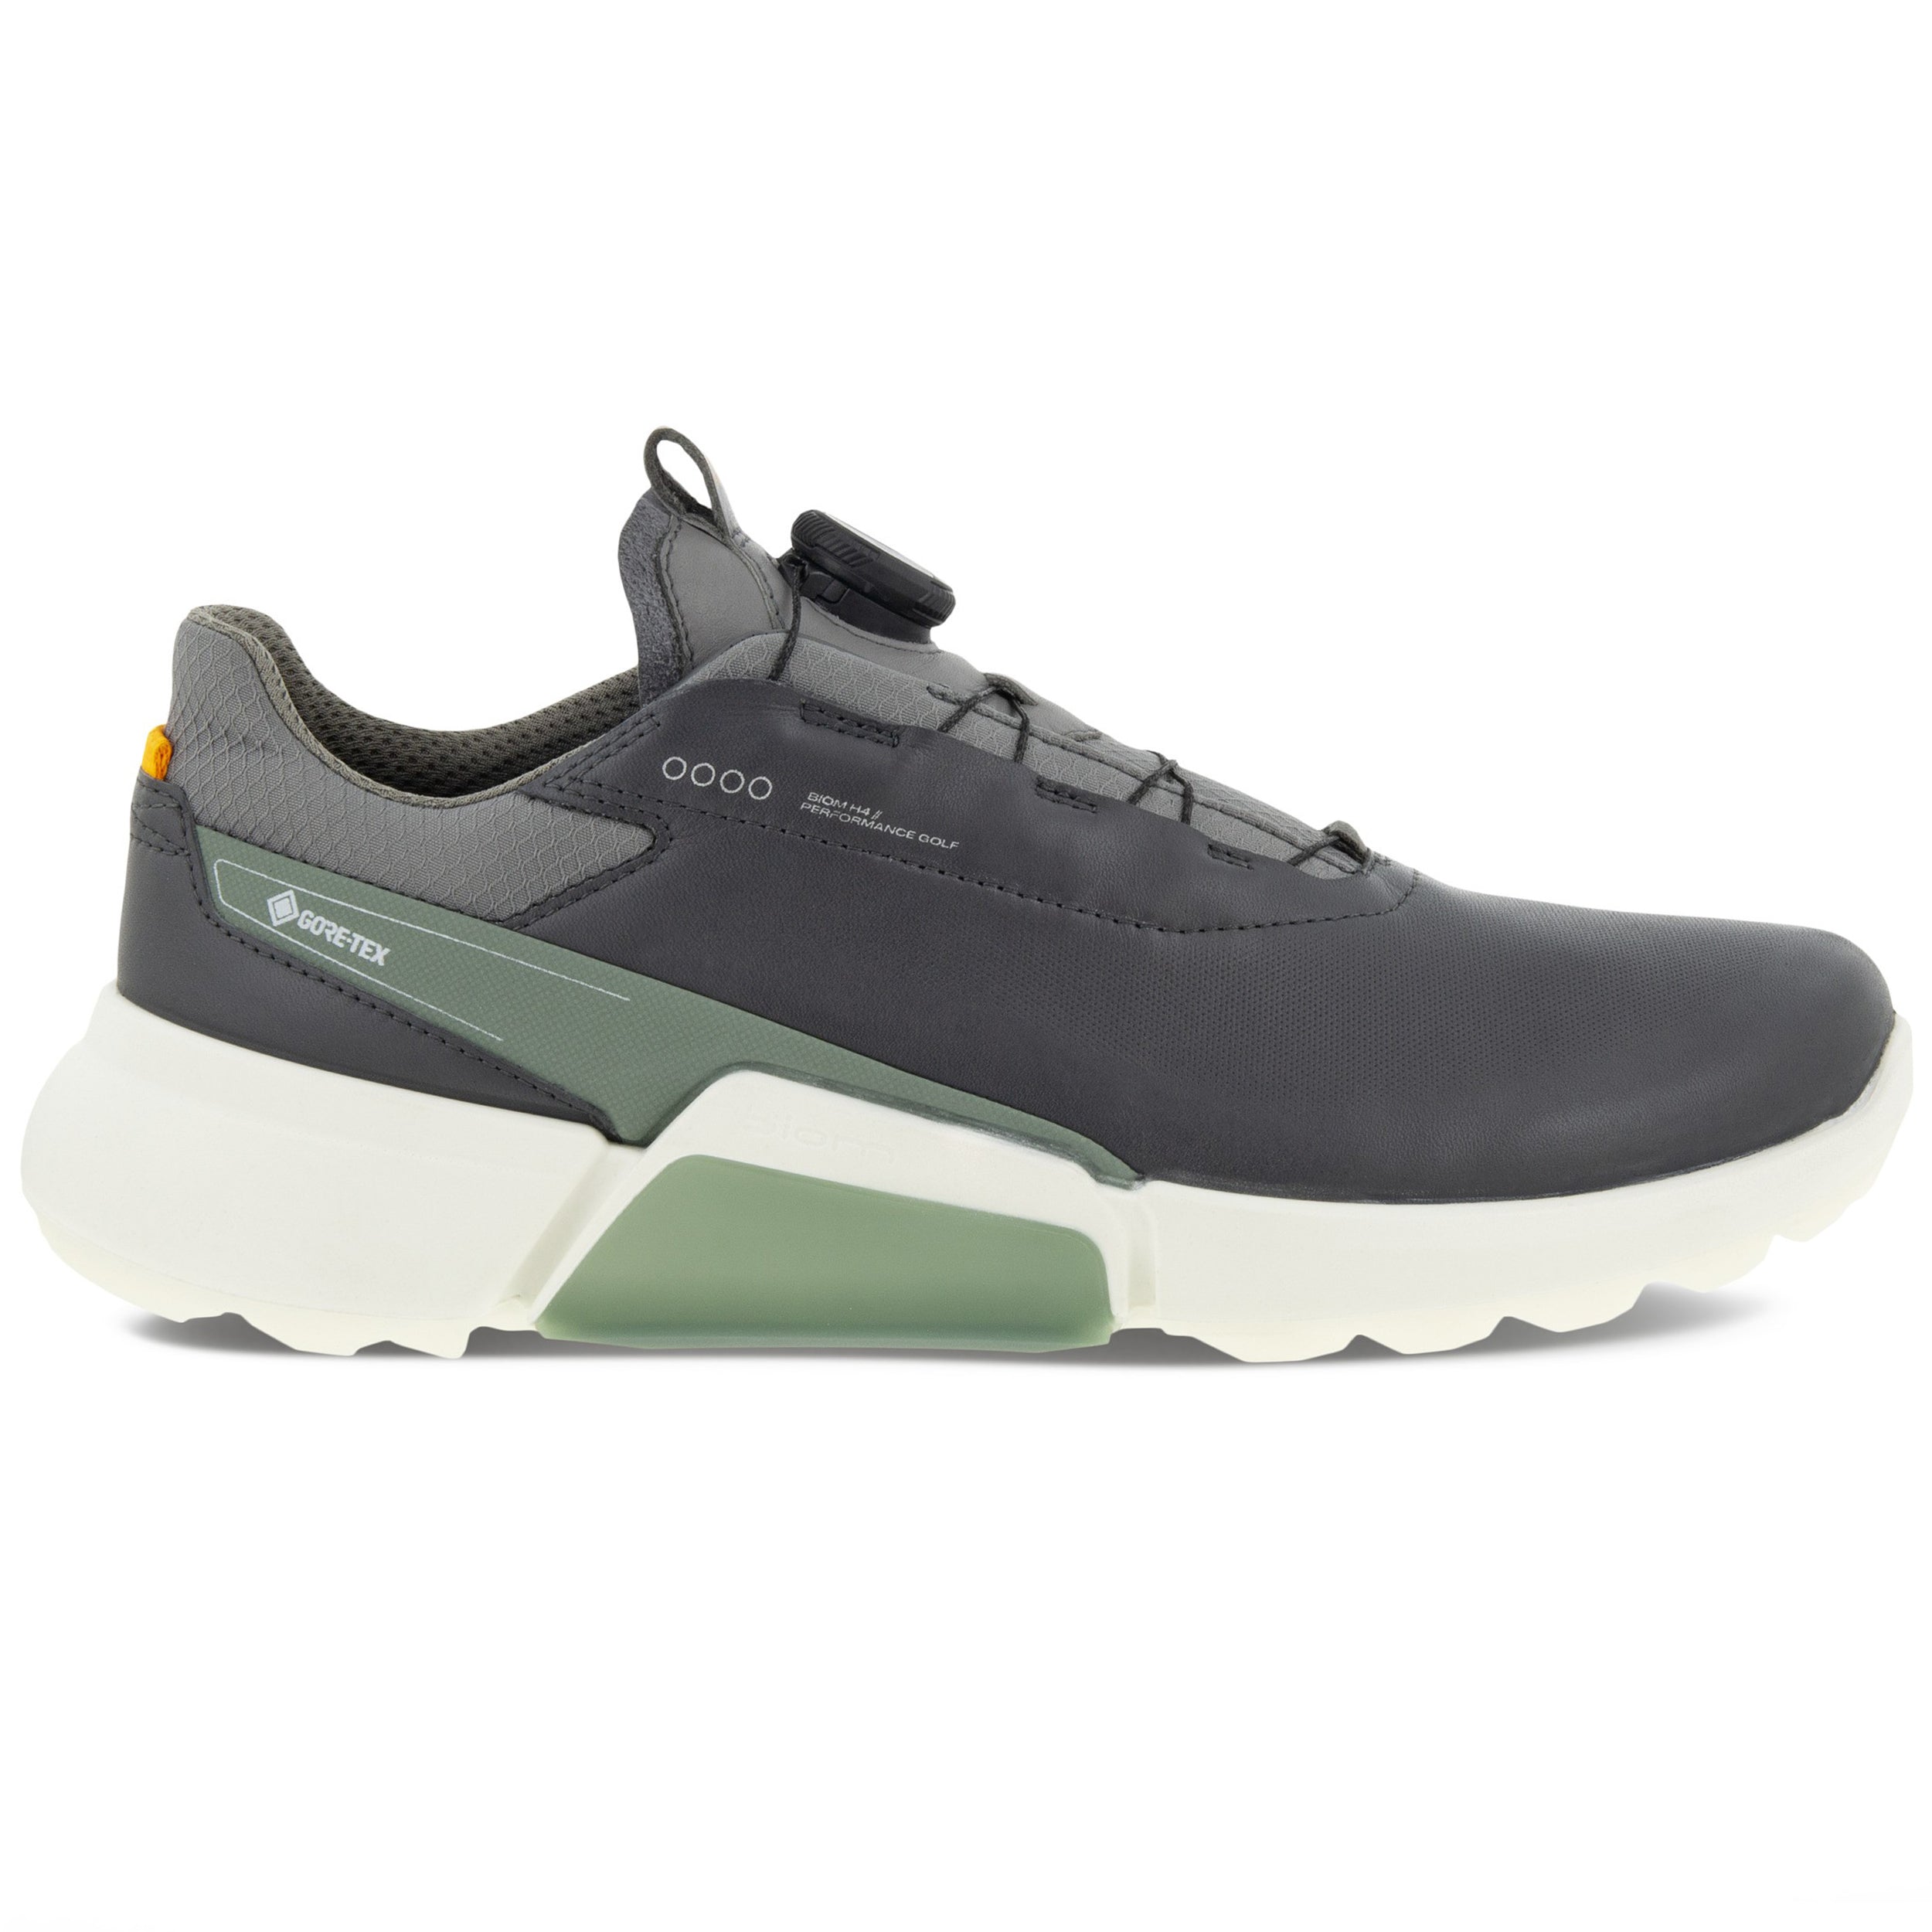 Ecco Biom Hybrid 4 Gore-Tex BOA Shoes 108504 Magent Frosty Green 60567 | Function18 | Restrictedgs